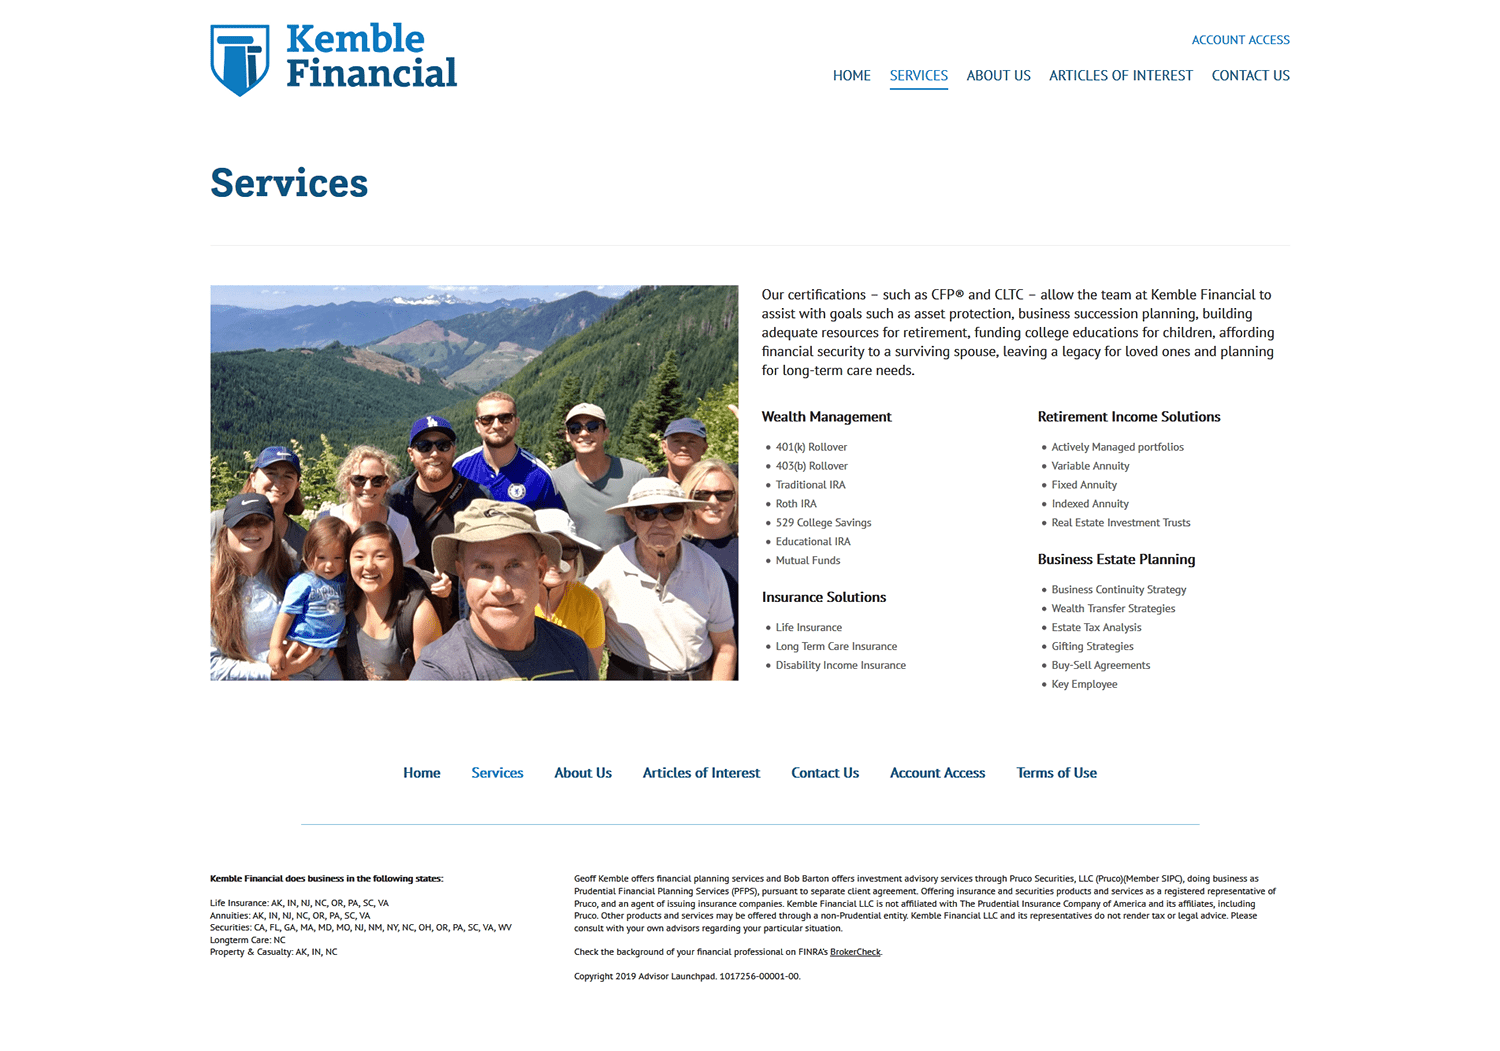 Kemble Financial website services page screenshot